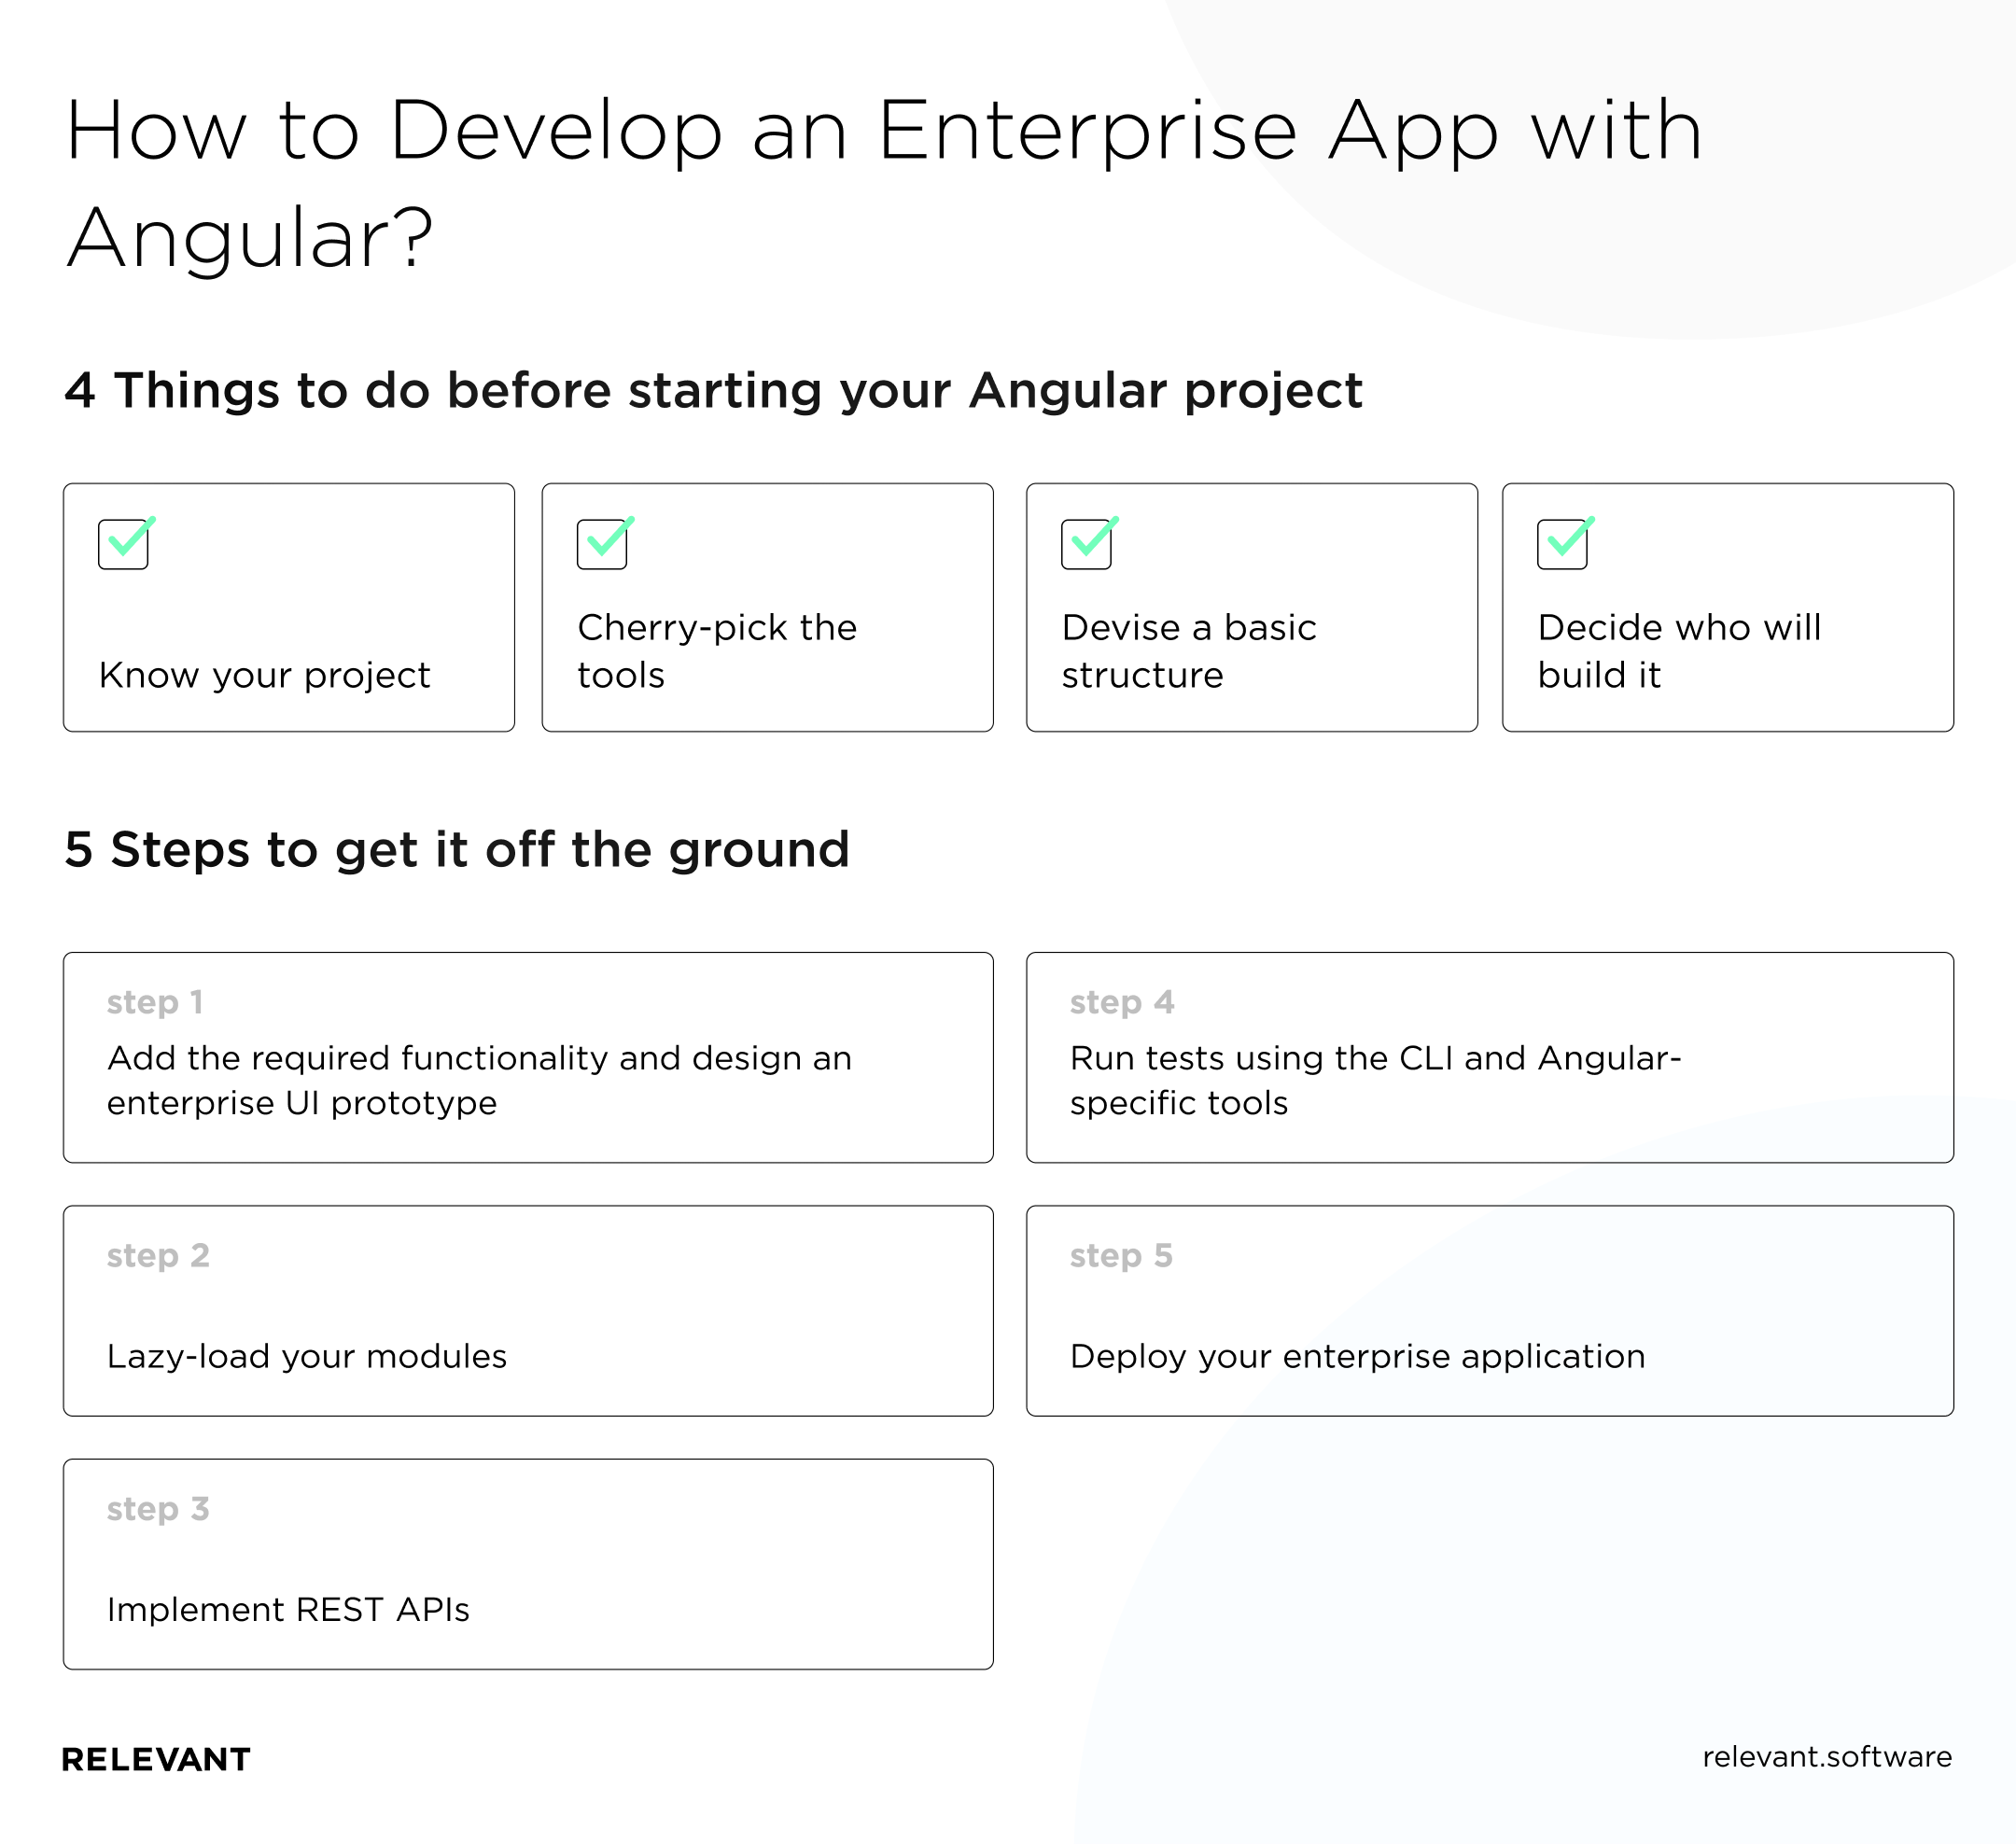 How to Develop an Enterprise App with Angular?